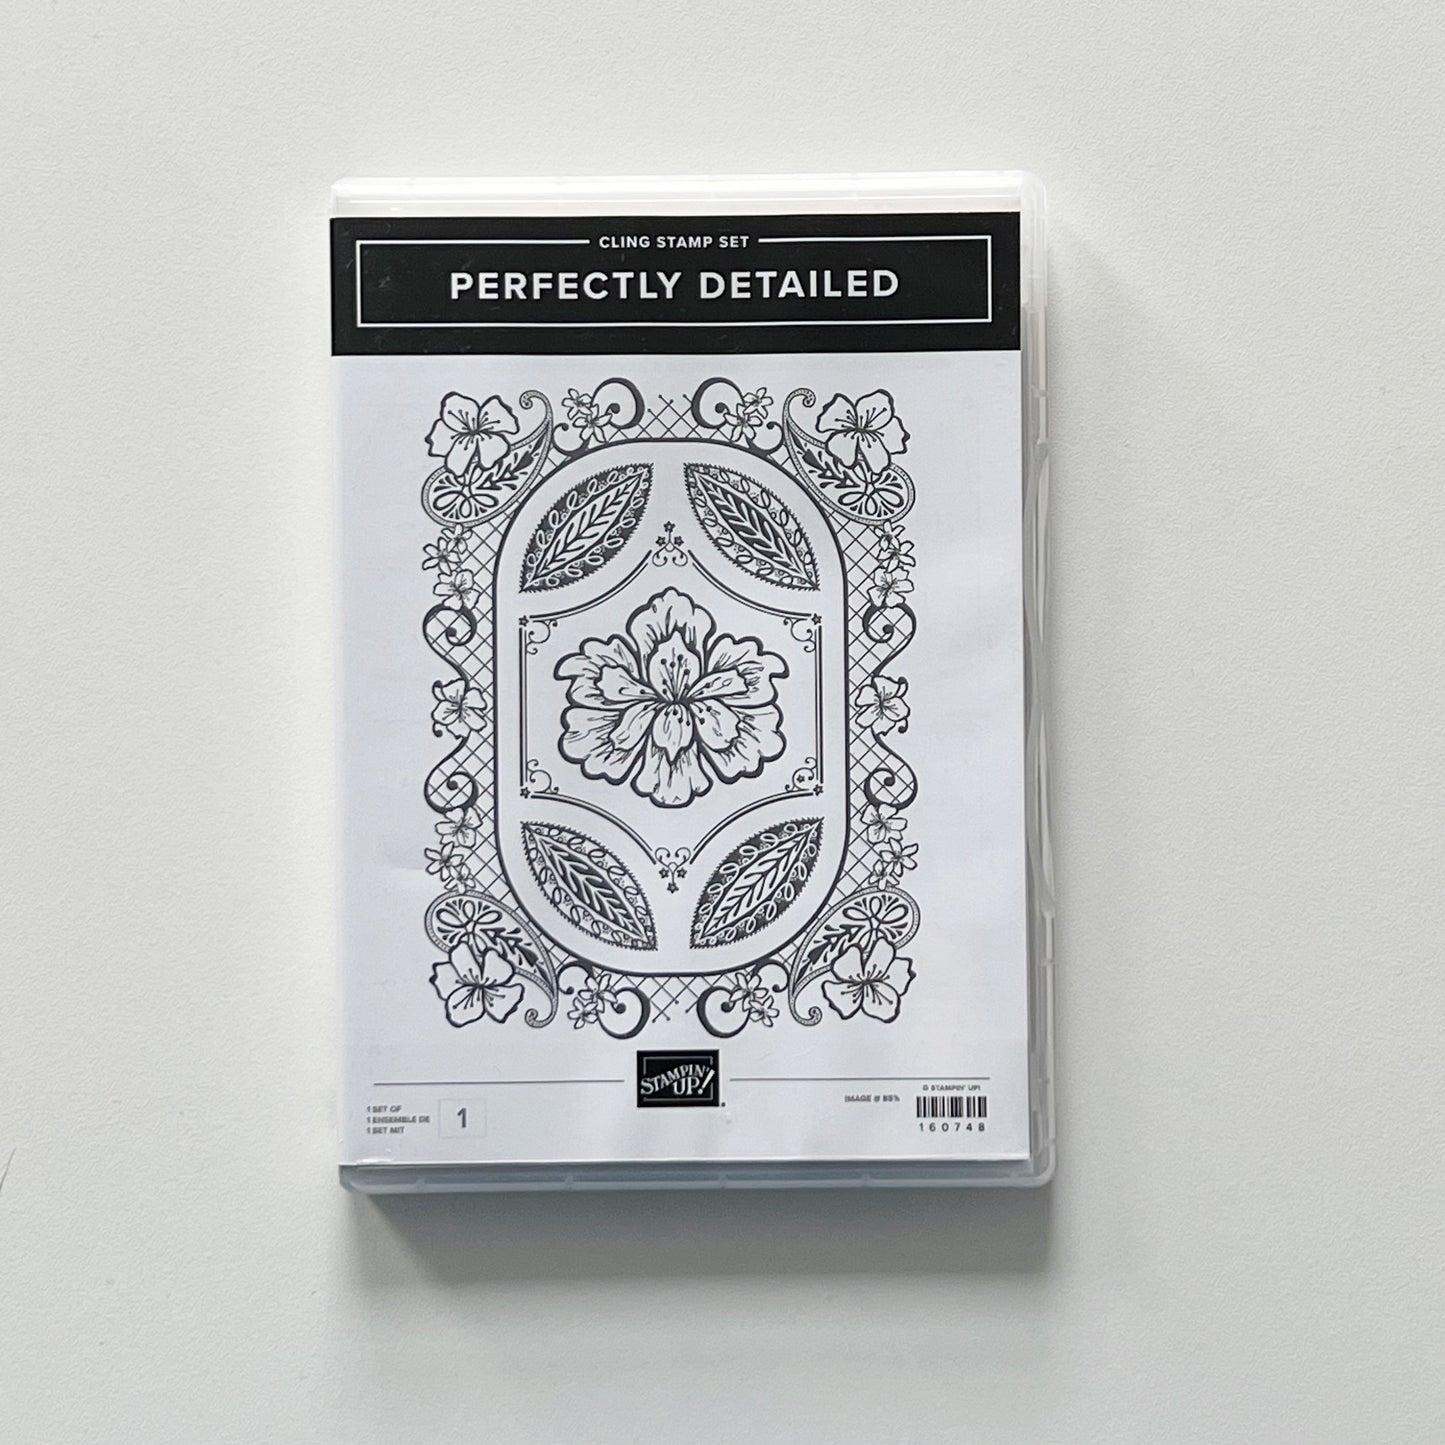 Stampin’ Up! Perfectly Detailed Stamp Set